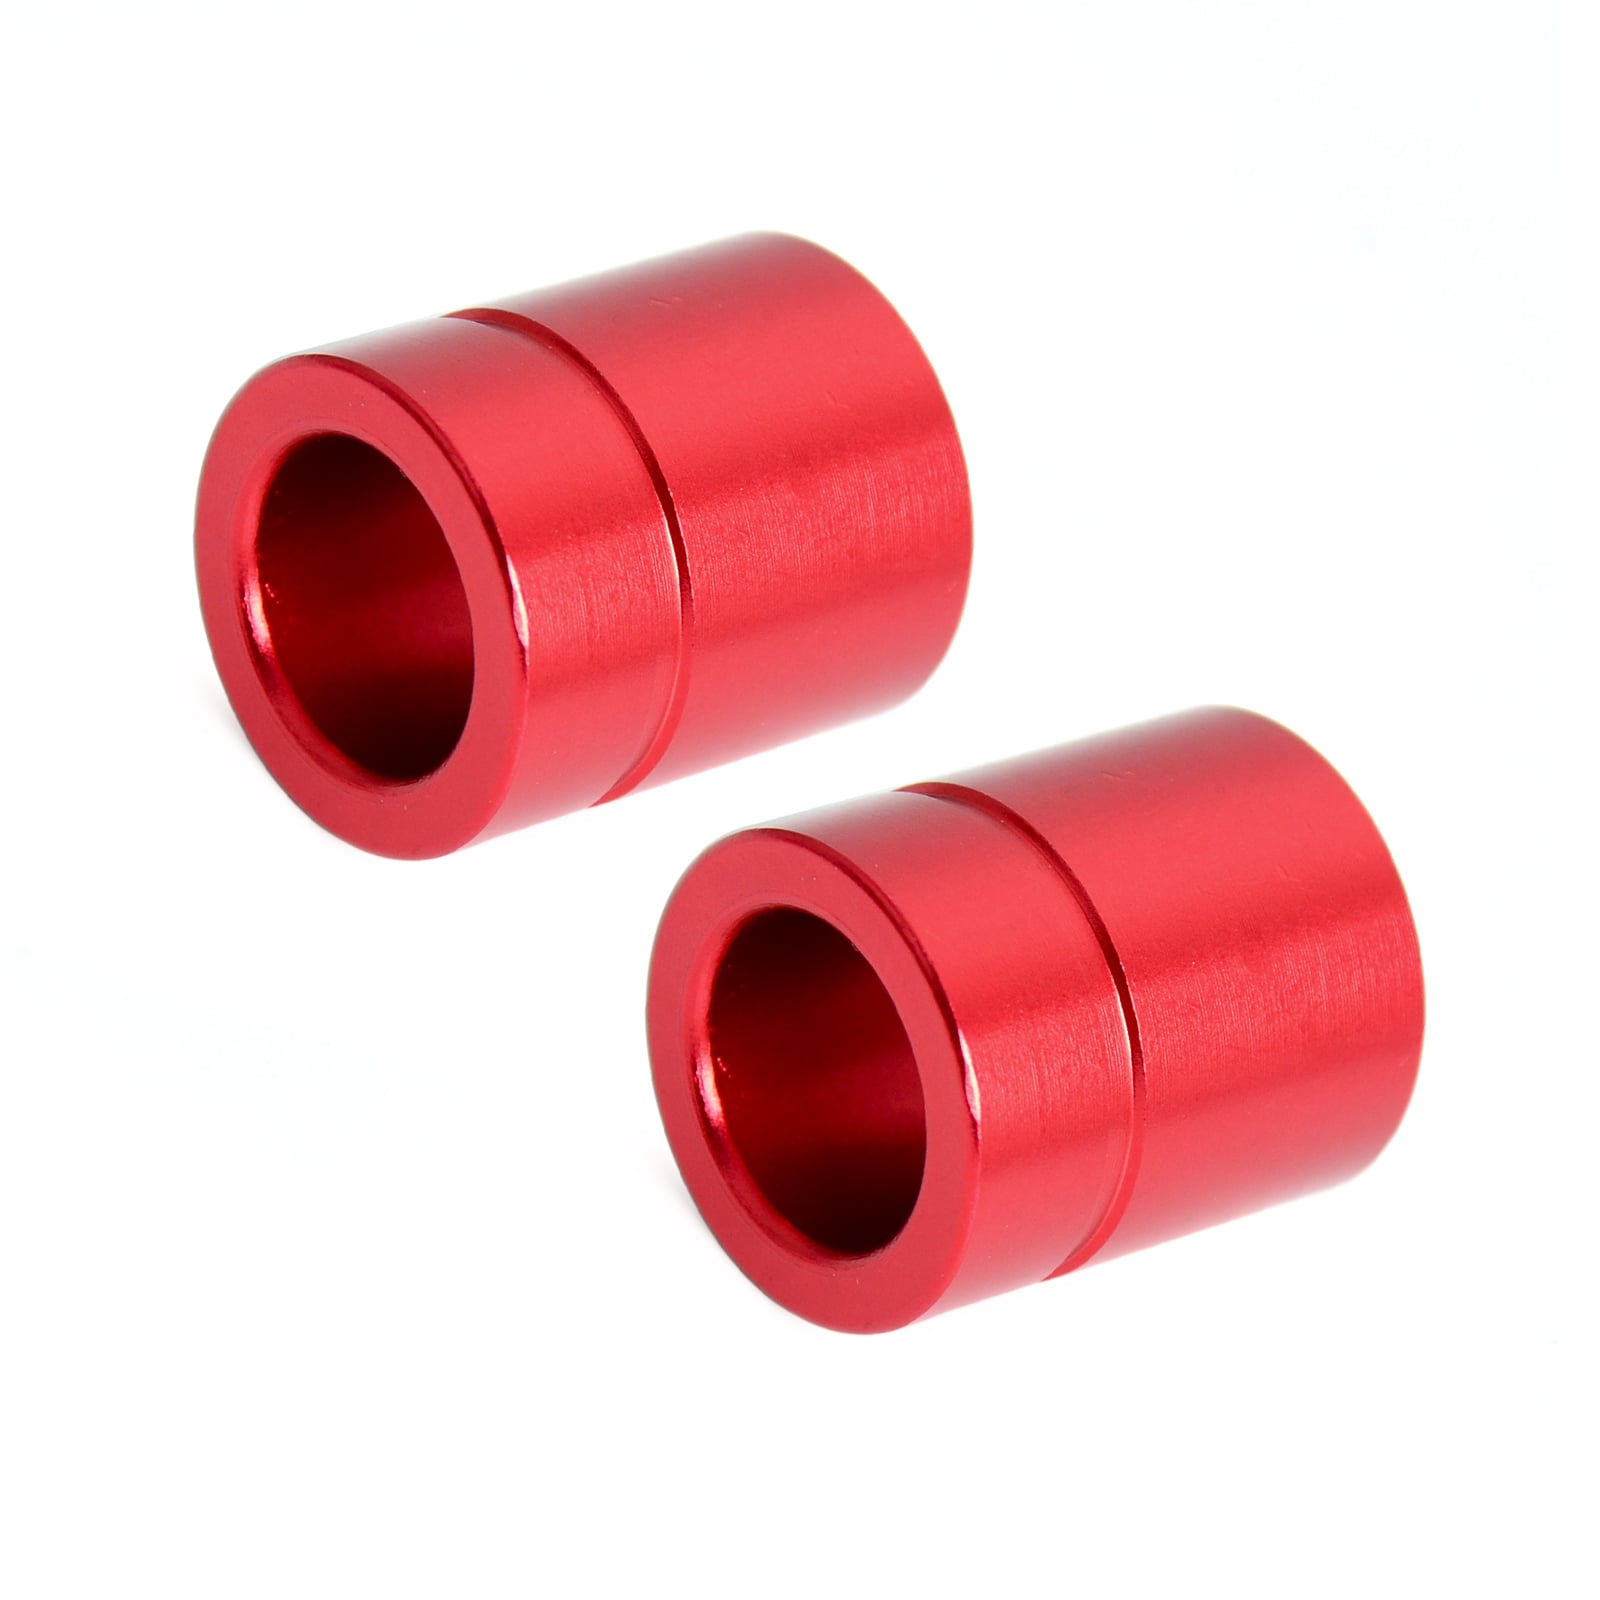 Front Rear Wheel Spacers Hub Collars for Honda CRF250L/M 12-16